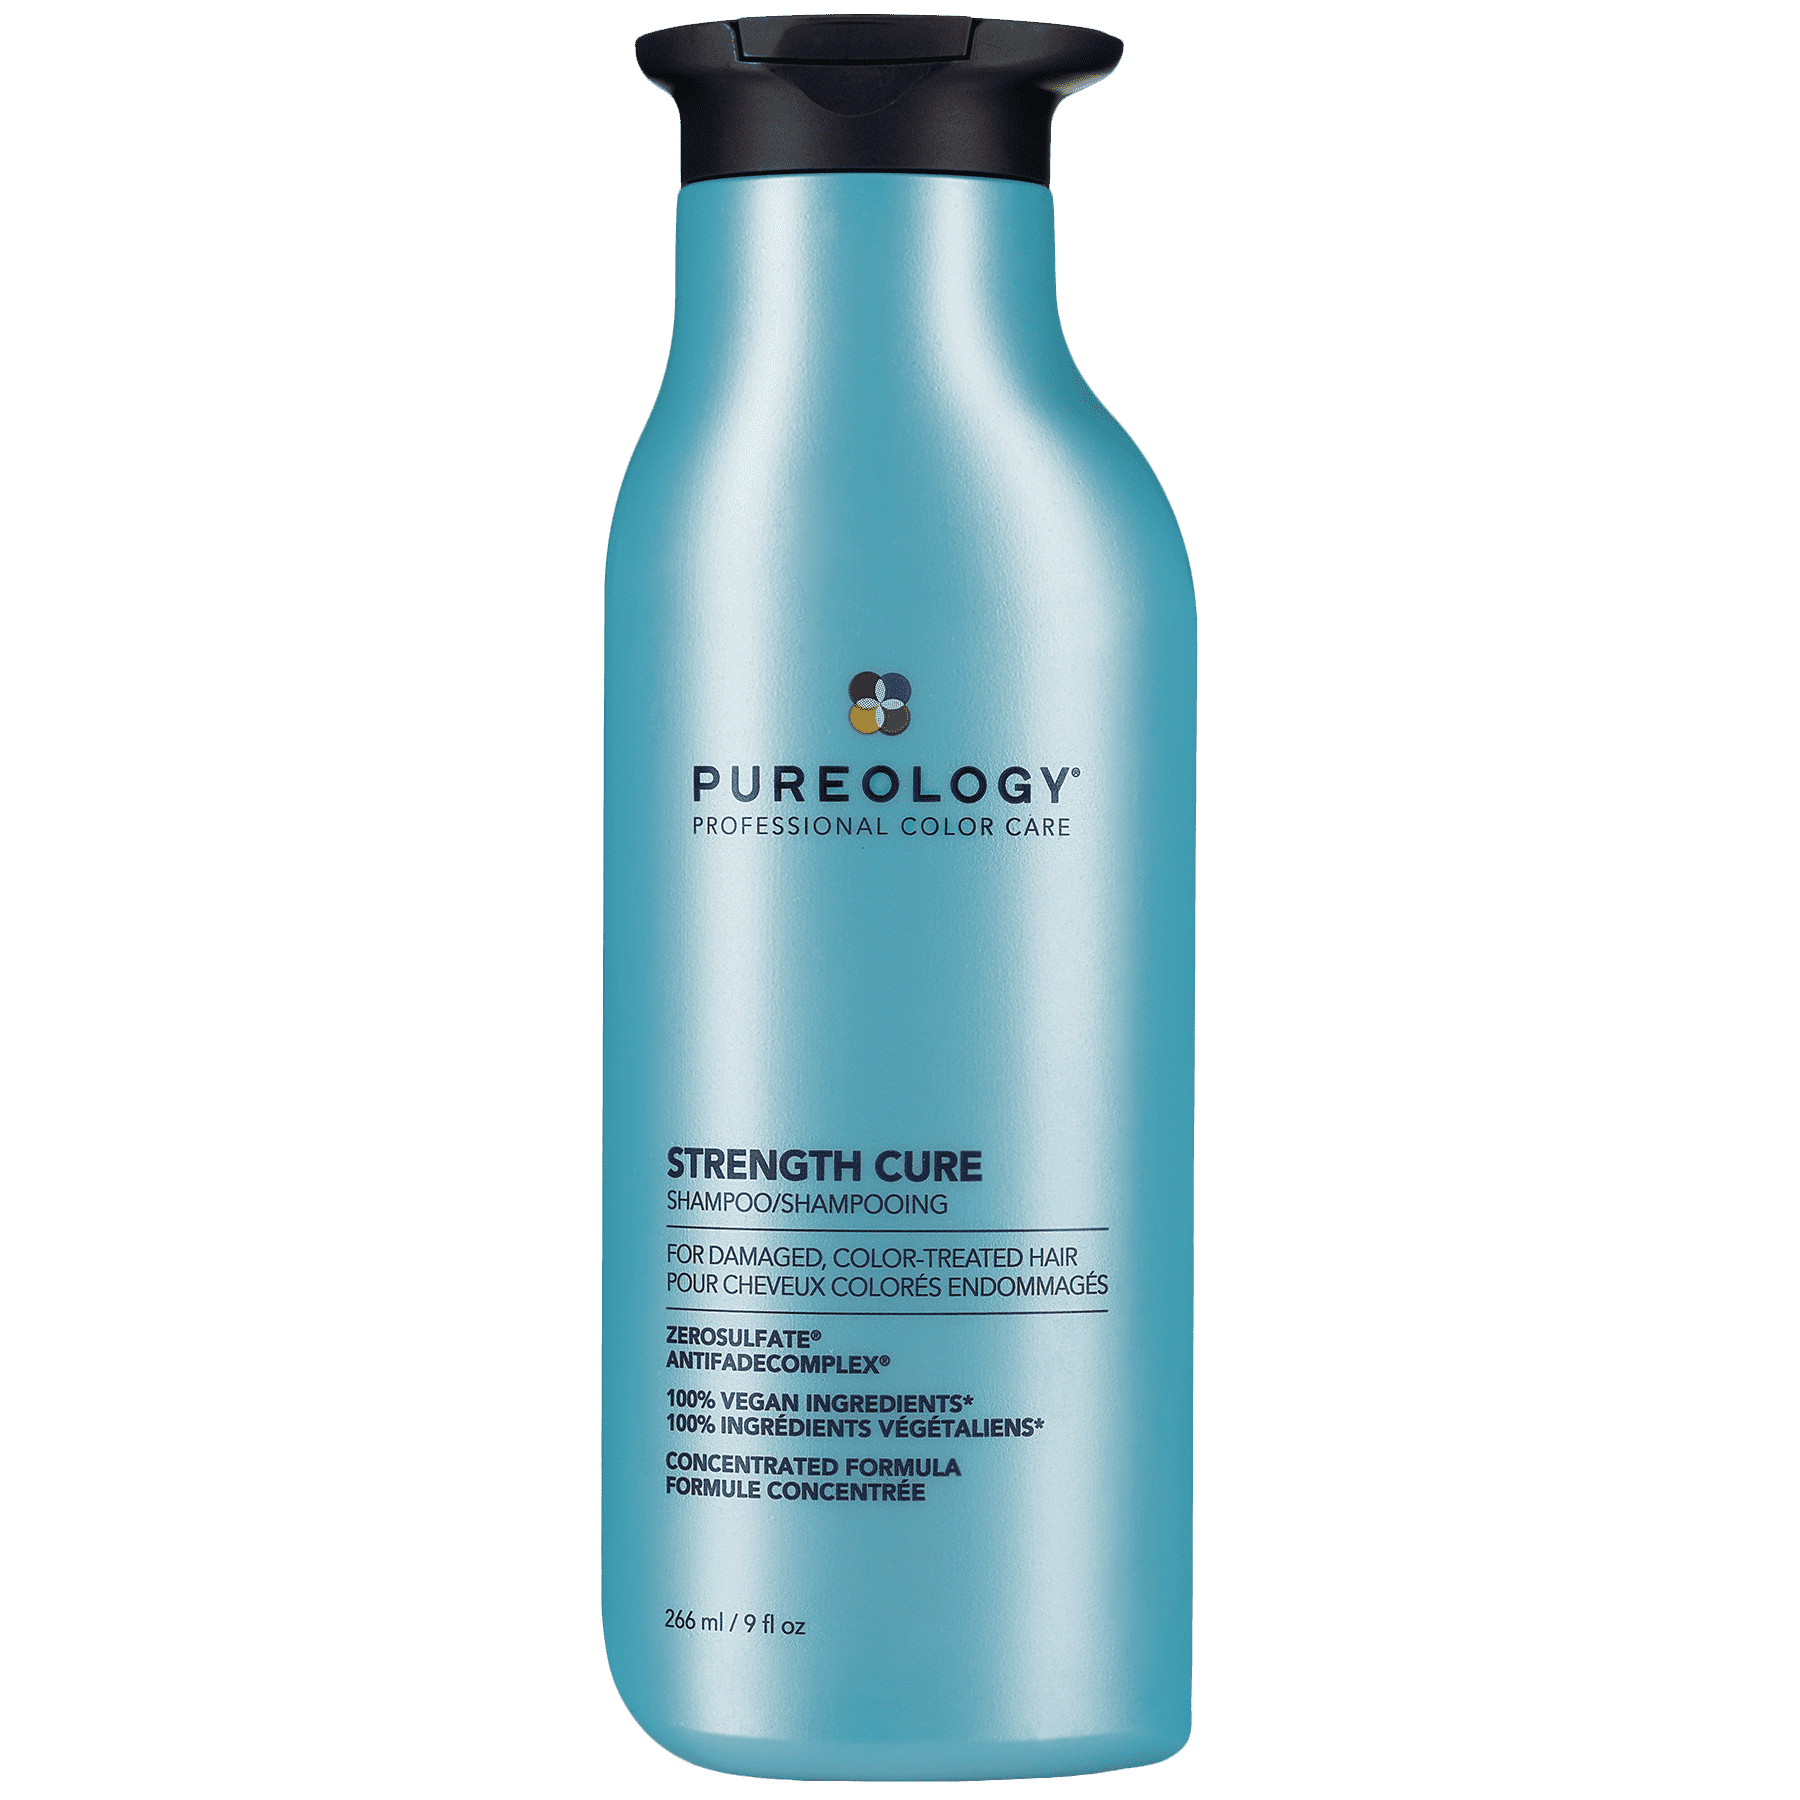 Pureology Strength Cure Shampoo Expressions Design